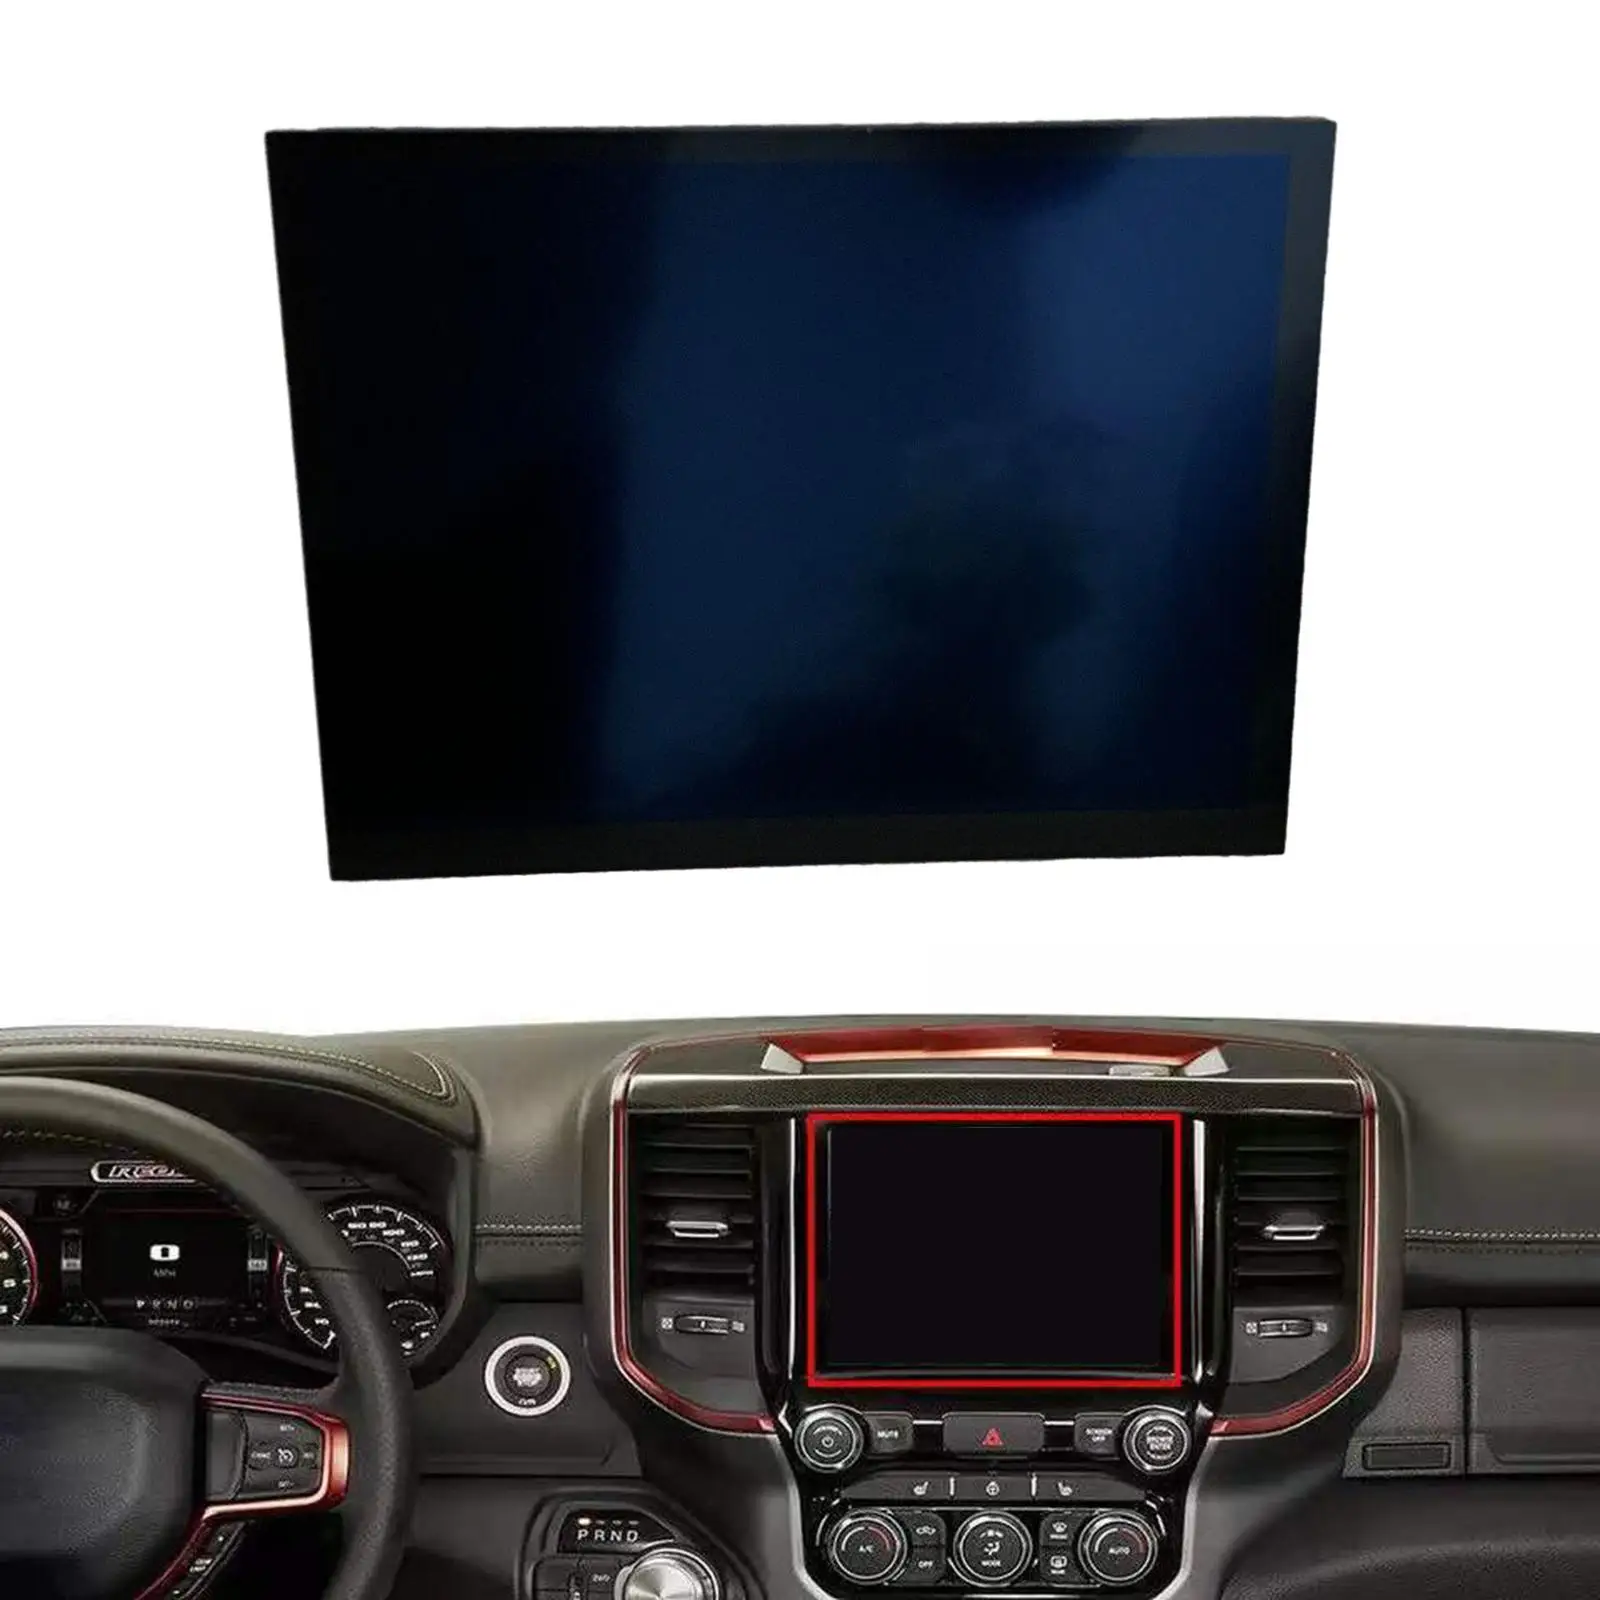 LA084x01(SL)(02) Premium Durable LCD Display Touch Screen Radio Navigation Replaces 8.4